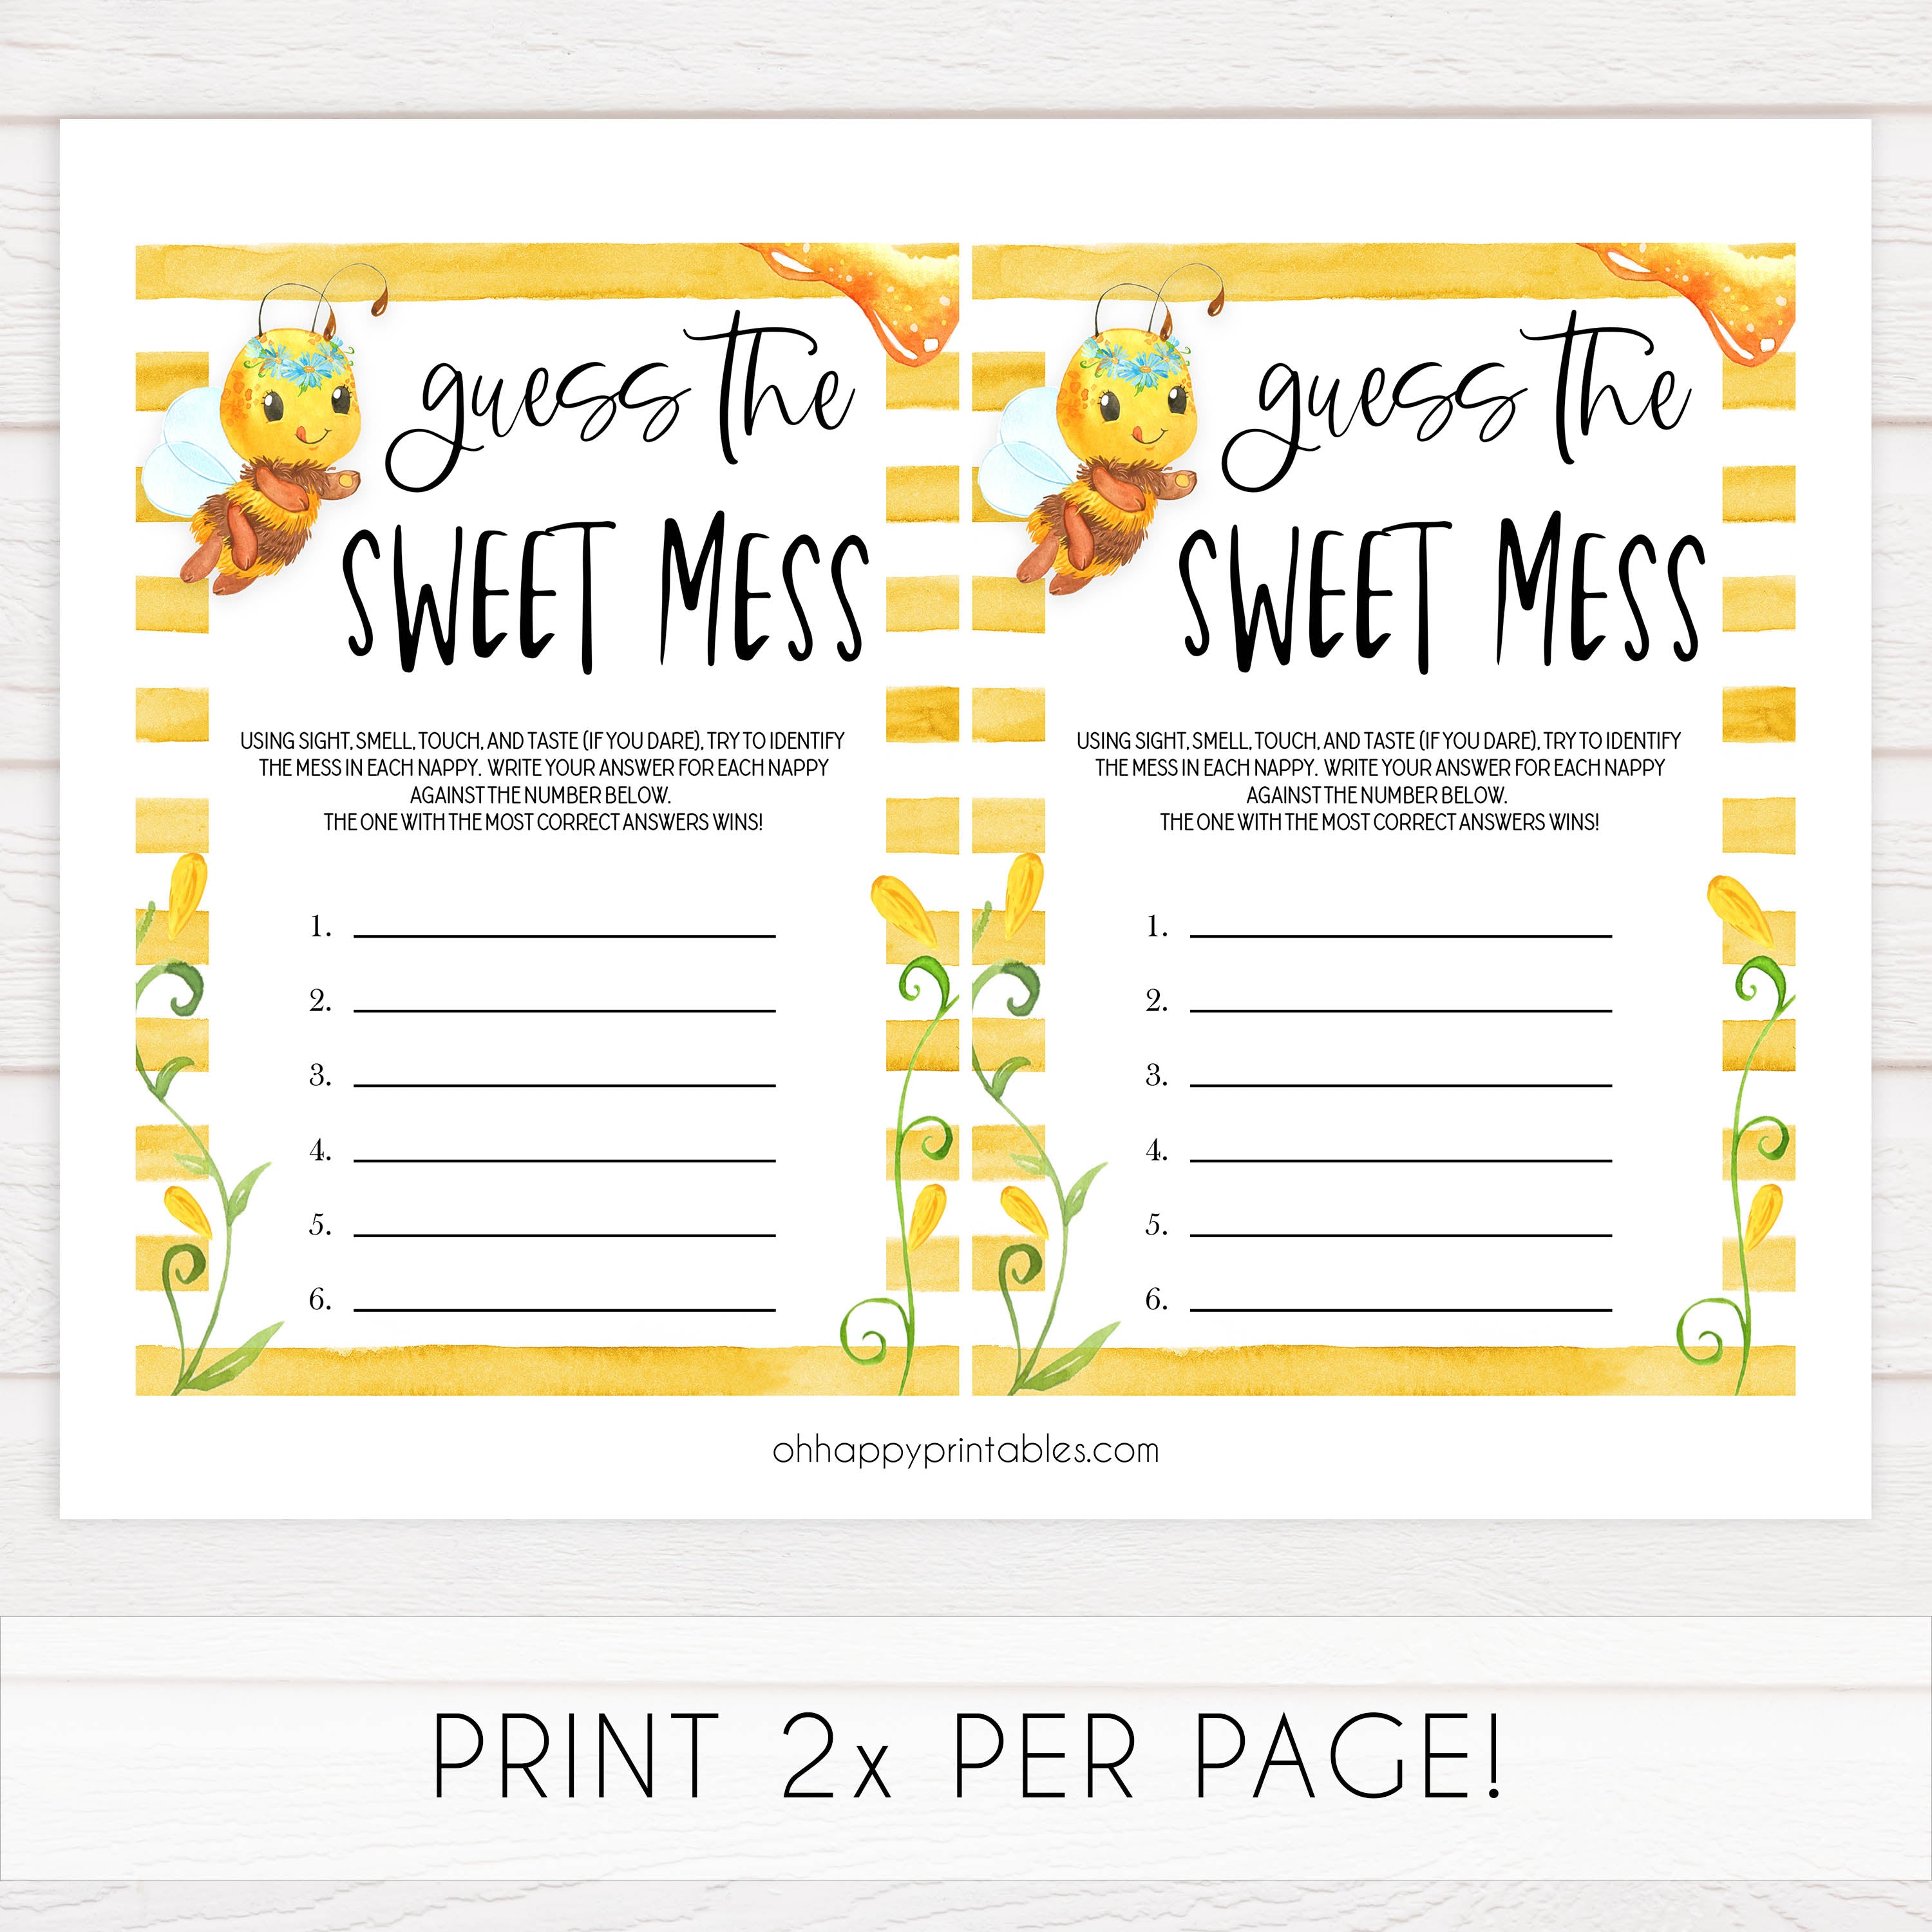 guess the sweet mess game, Printable baby shower games, mommy bee fun baby games, baby shower games, fun baby shower ideas, top baby shower ideas, mommy to bee baby shower, friends baby shower ideas